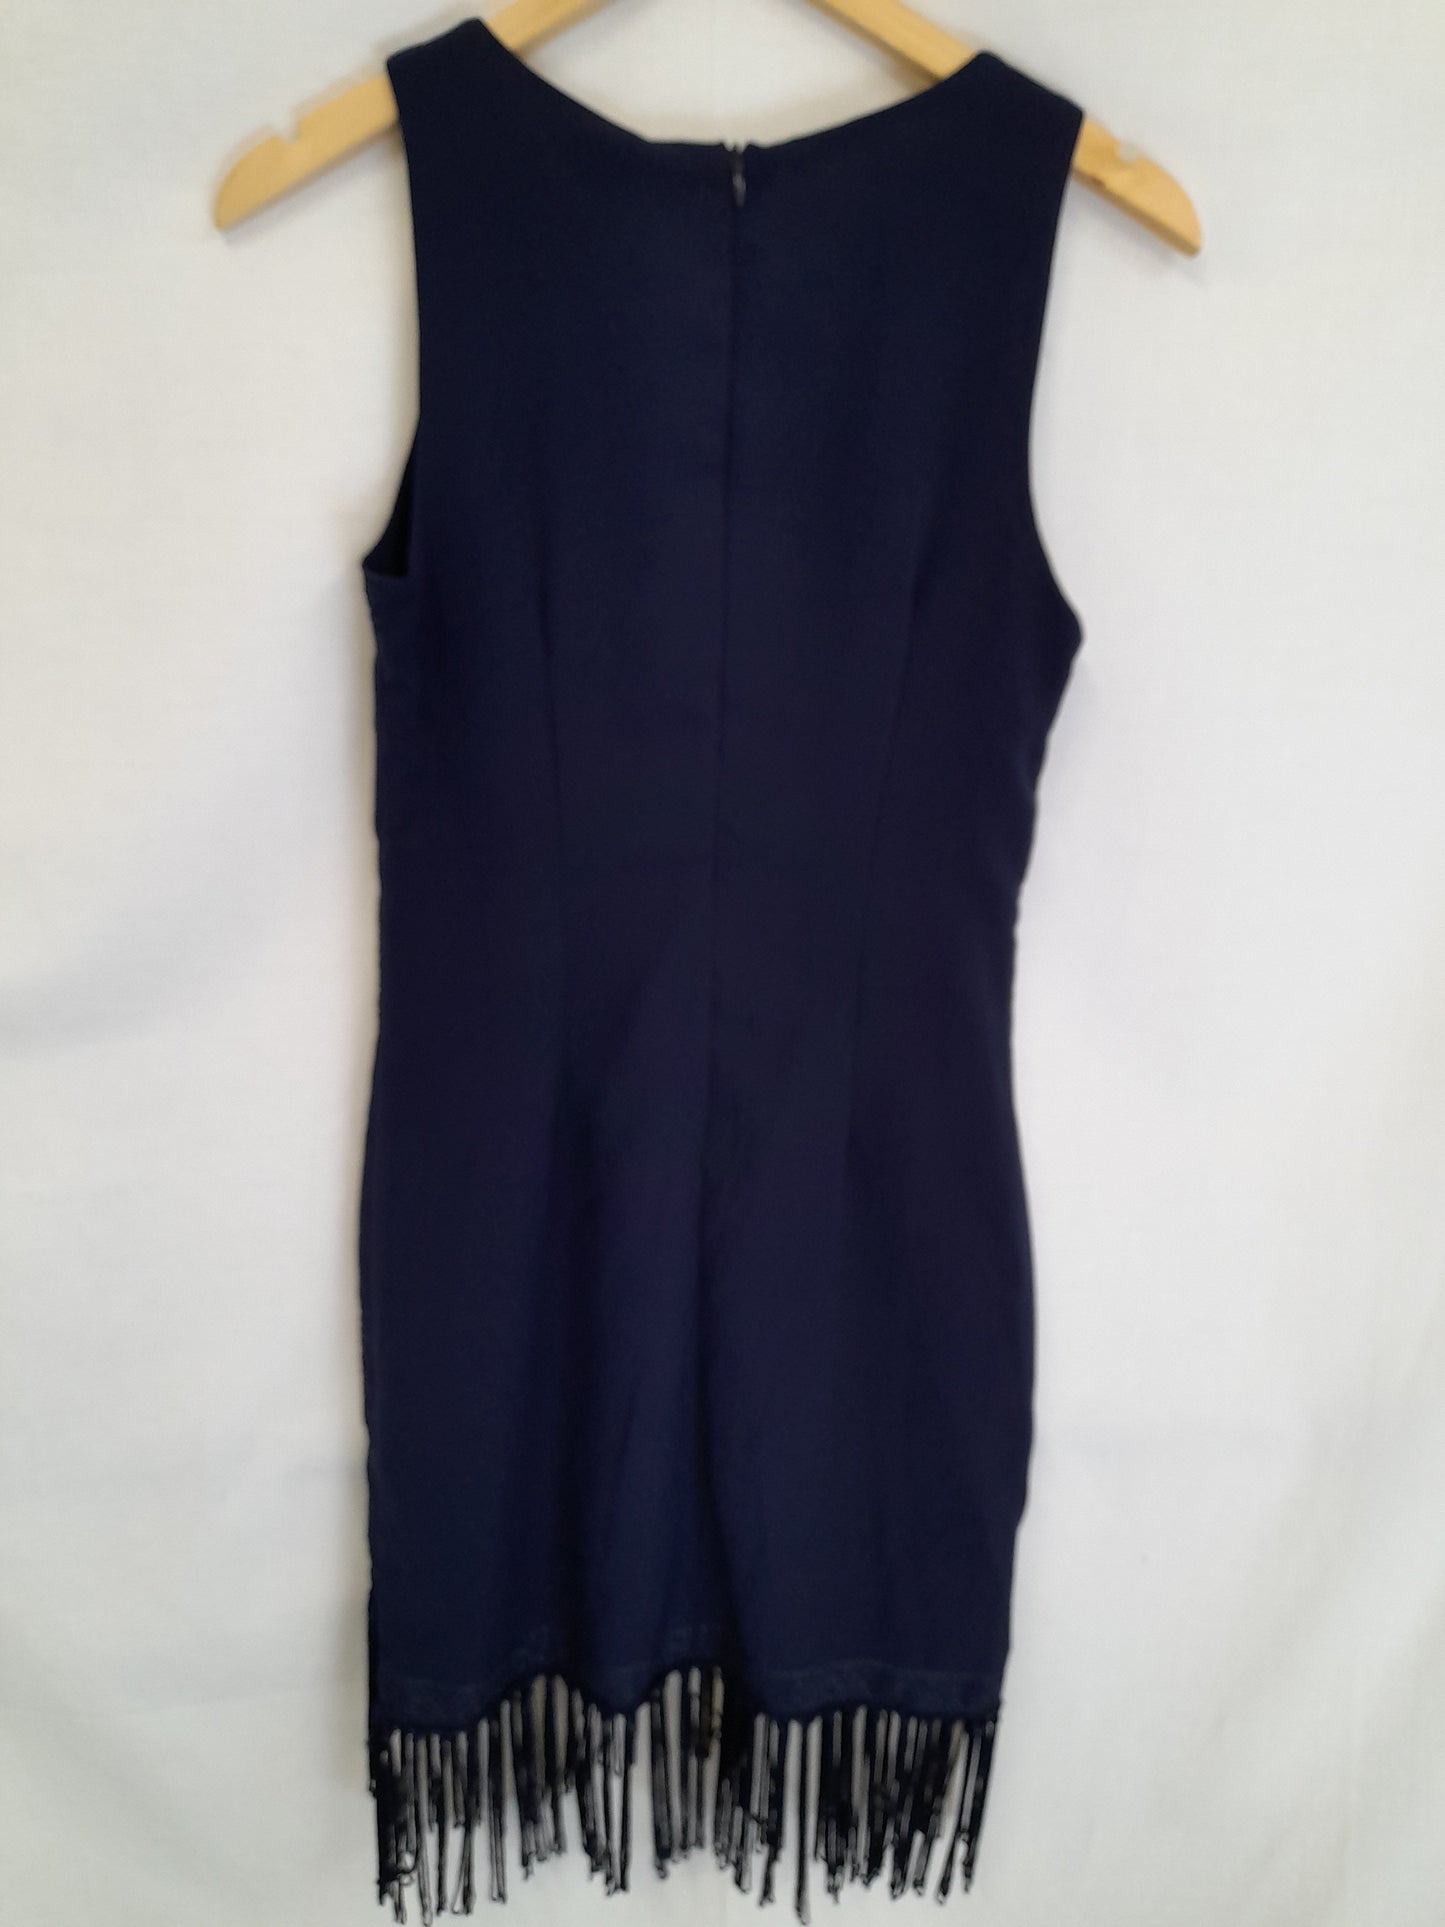 Navy Embroidered 'Staring At Stars' Dress Size XS